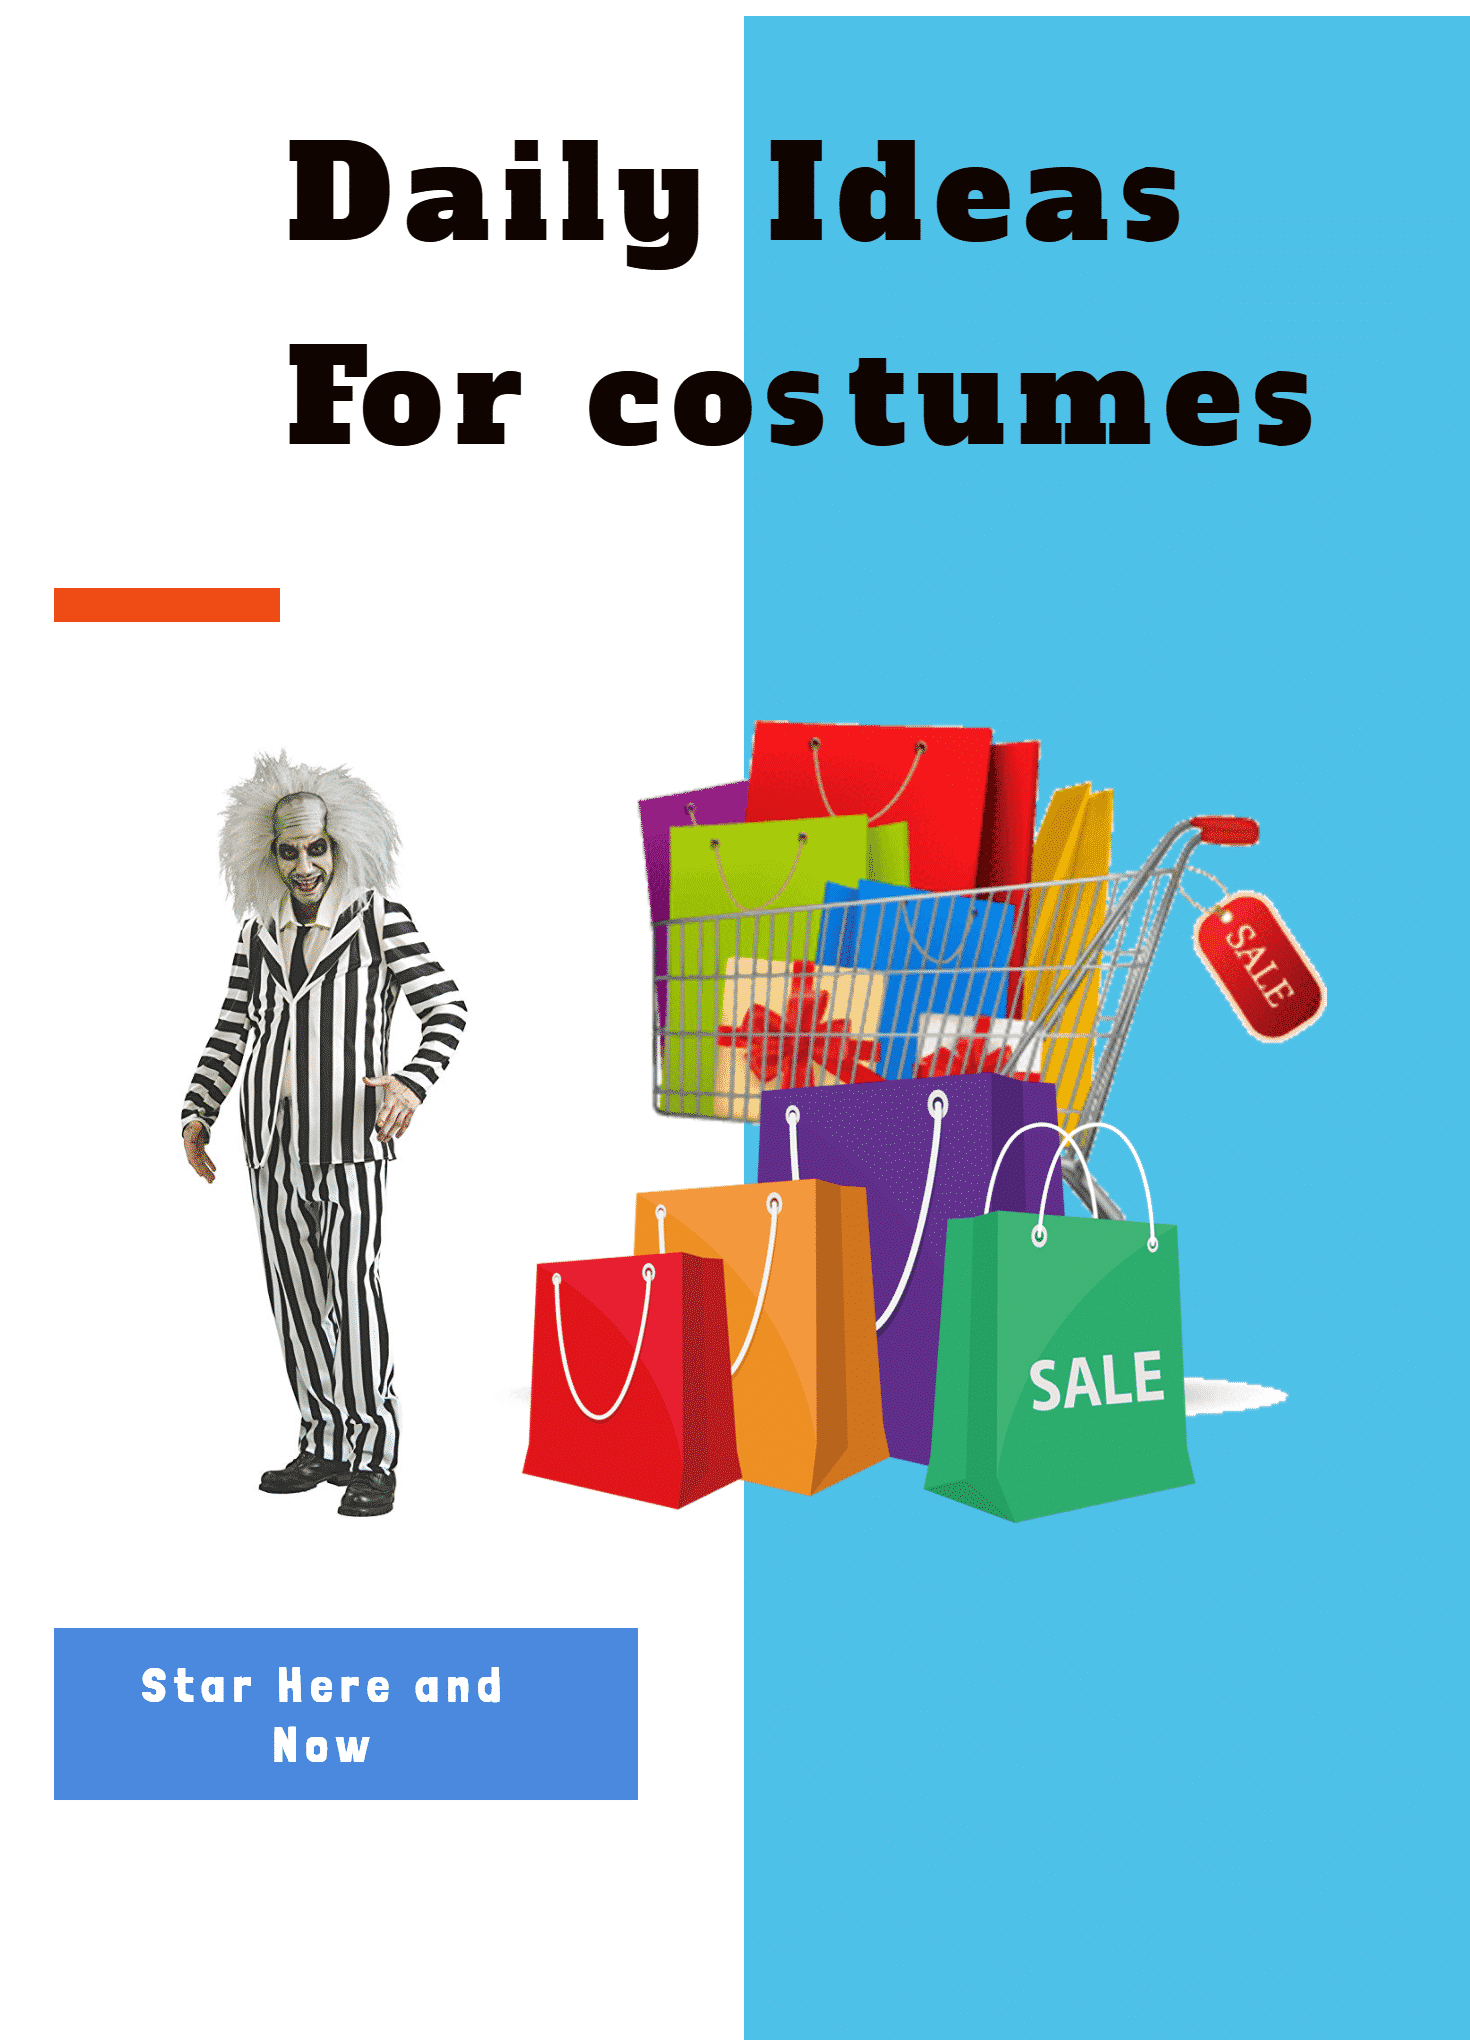 Costume ideas and Finding Discount for Halloween Costumes